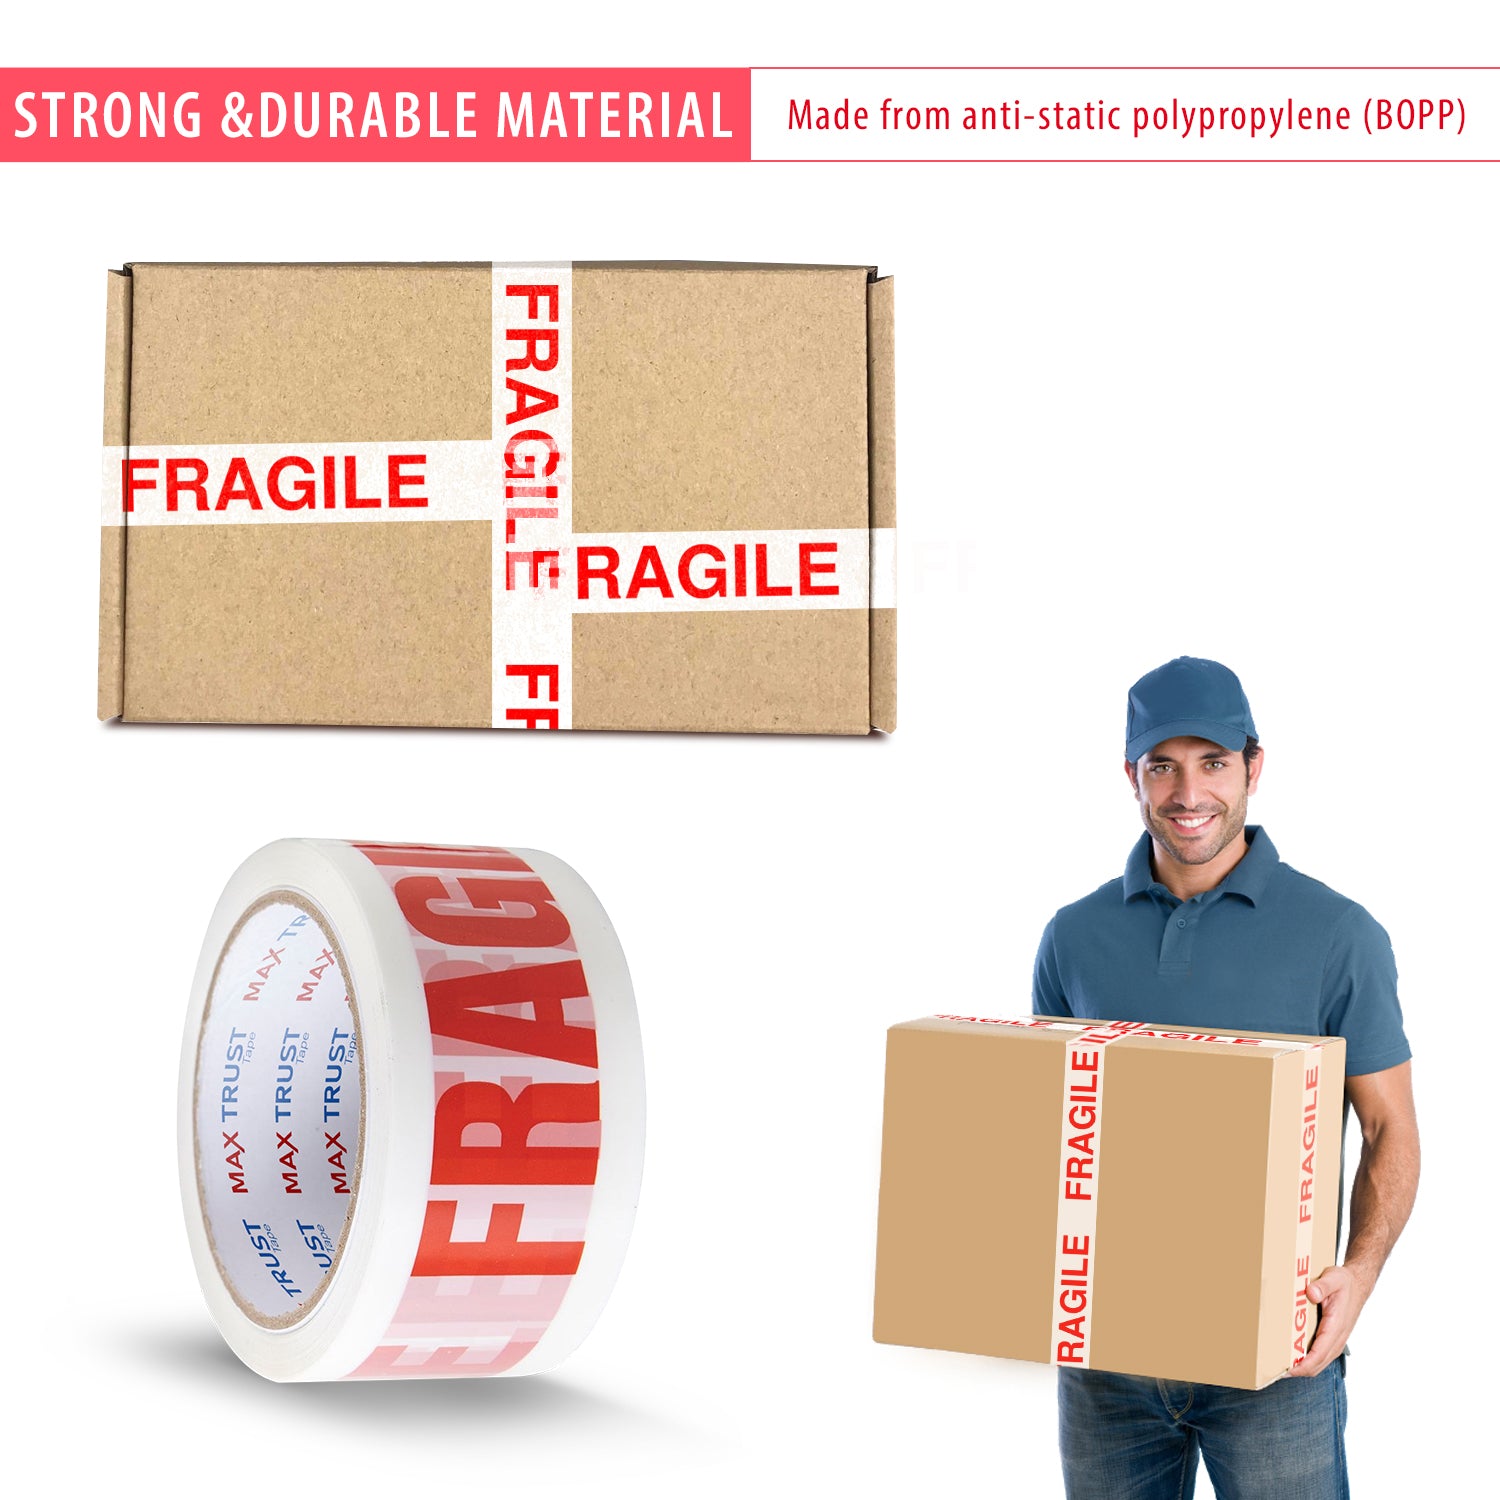 Fragile Printed Rolls of Tape! 